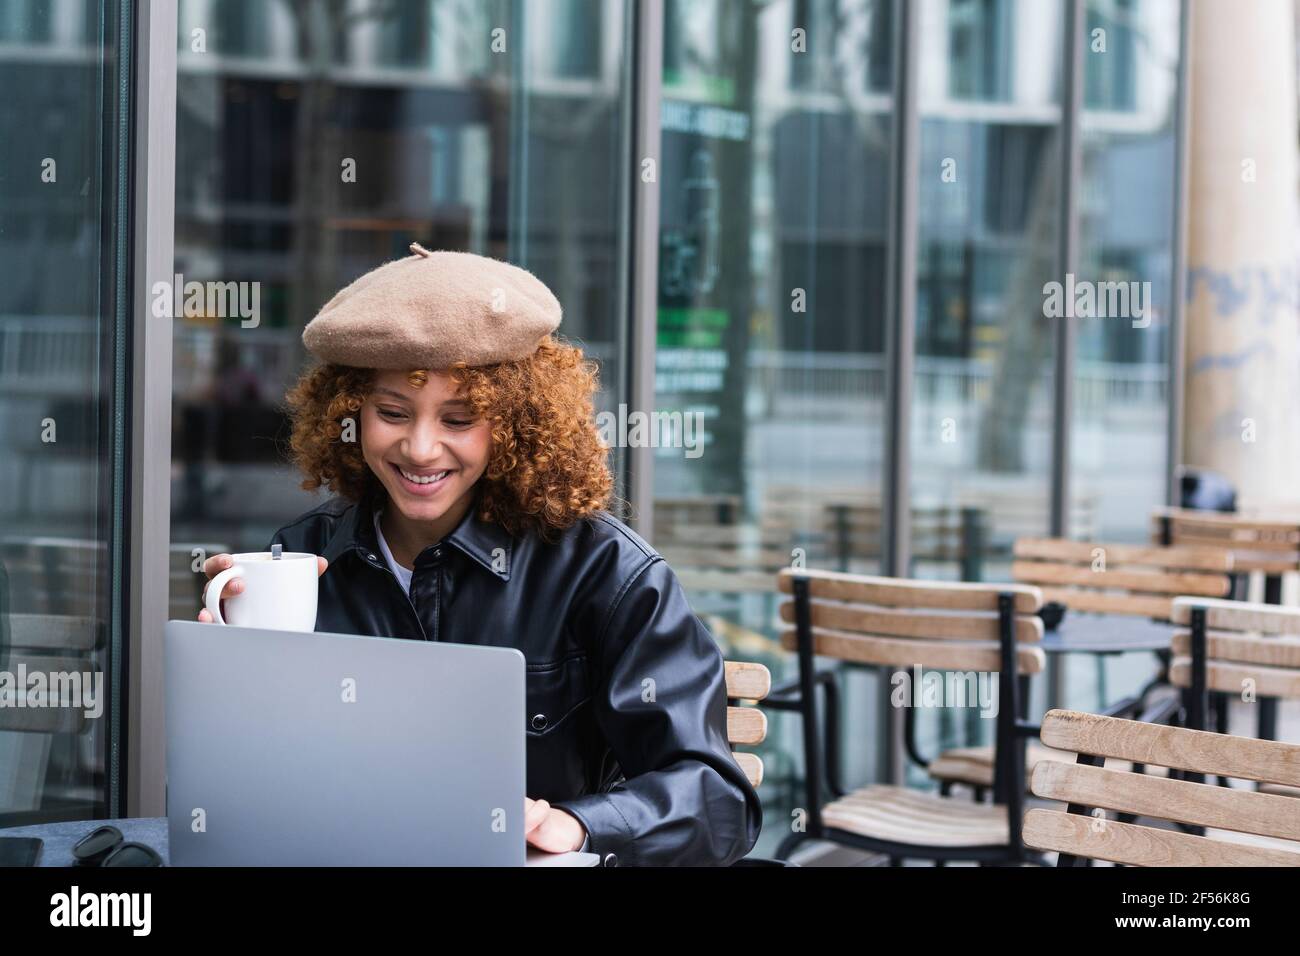 Female teenager with coffee cup using laptop at sidewalk cafe Stock Photo